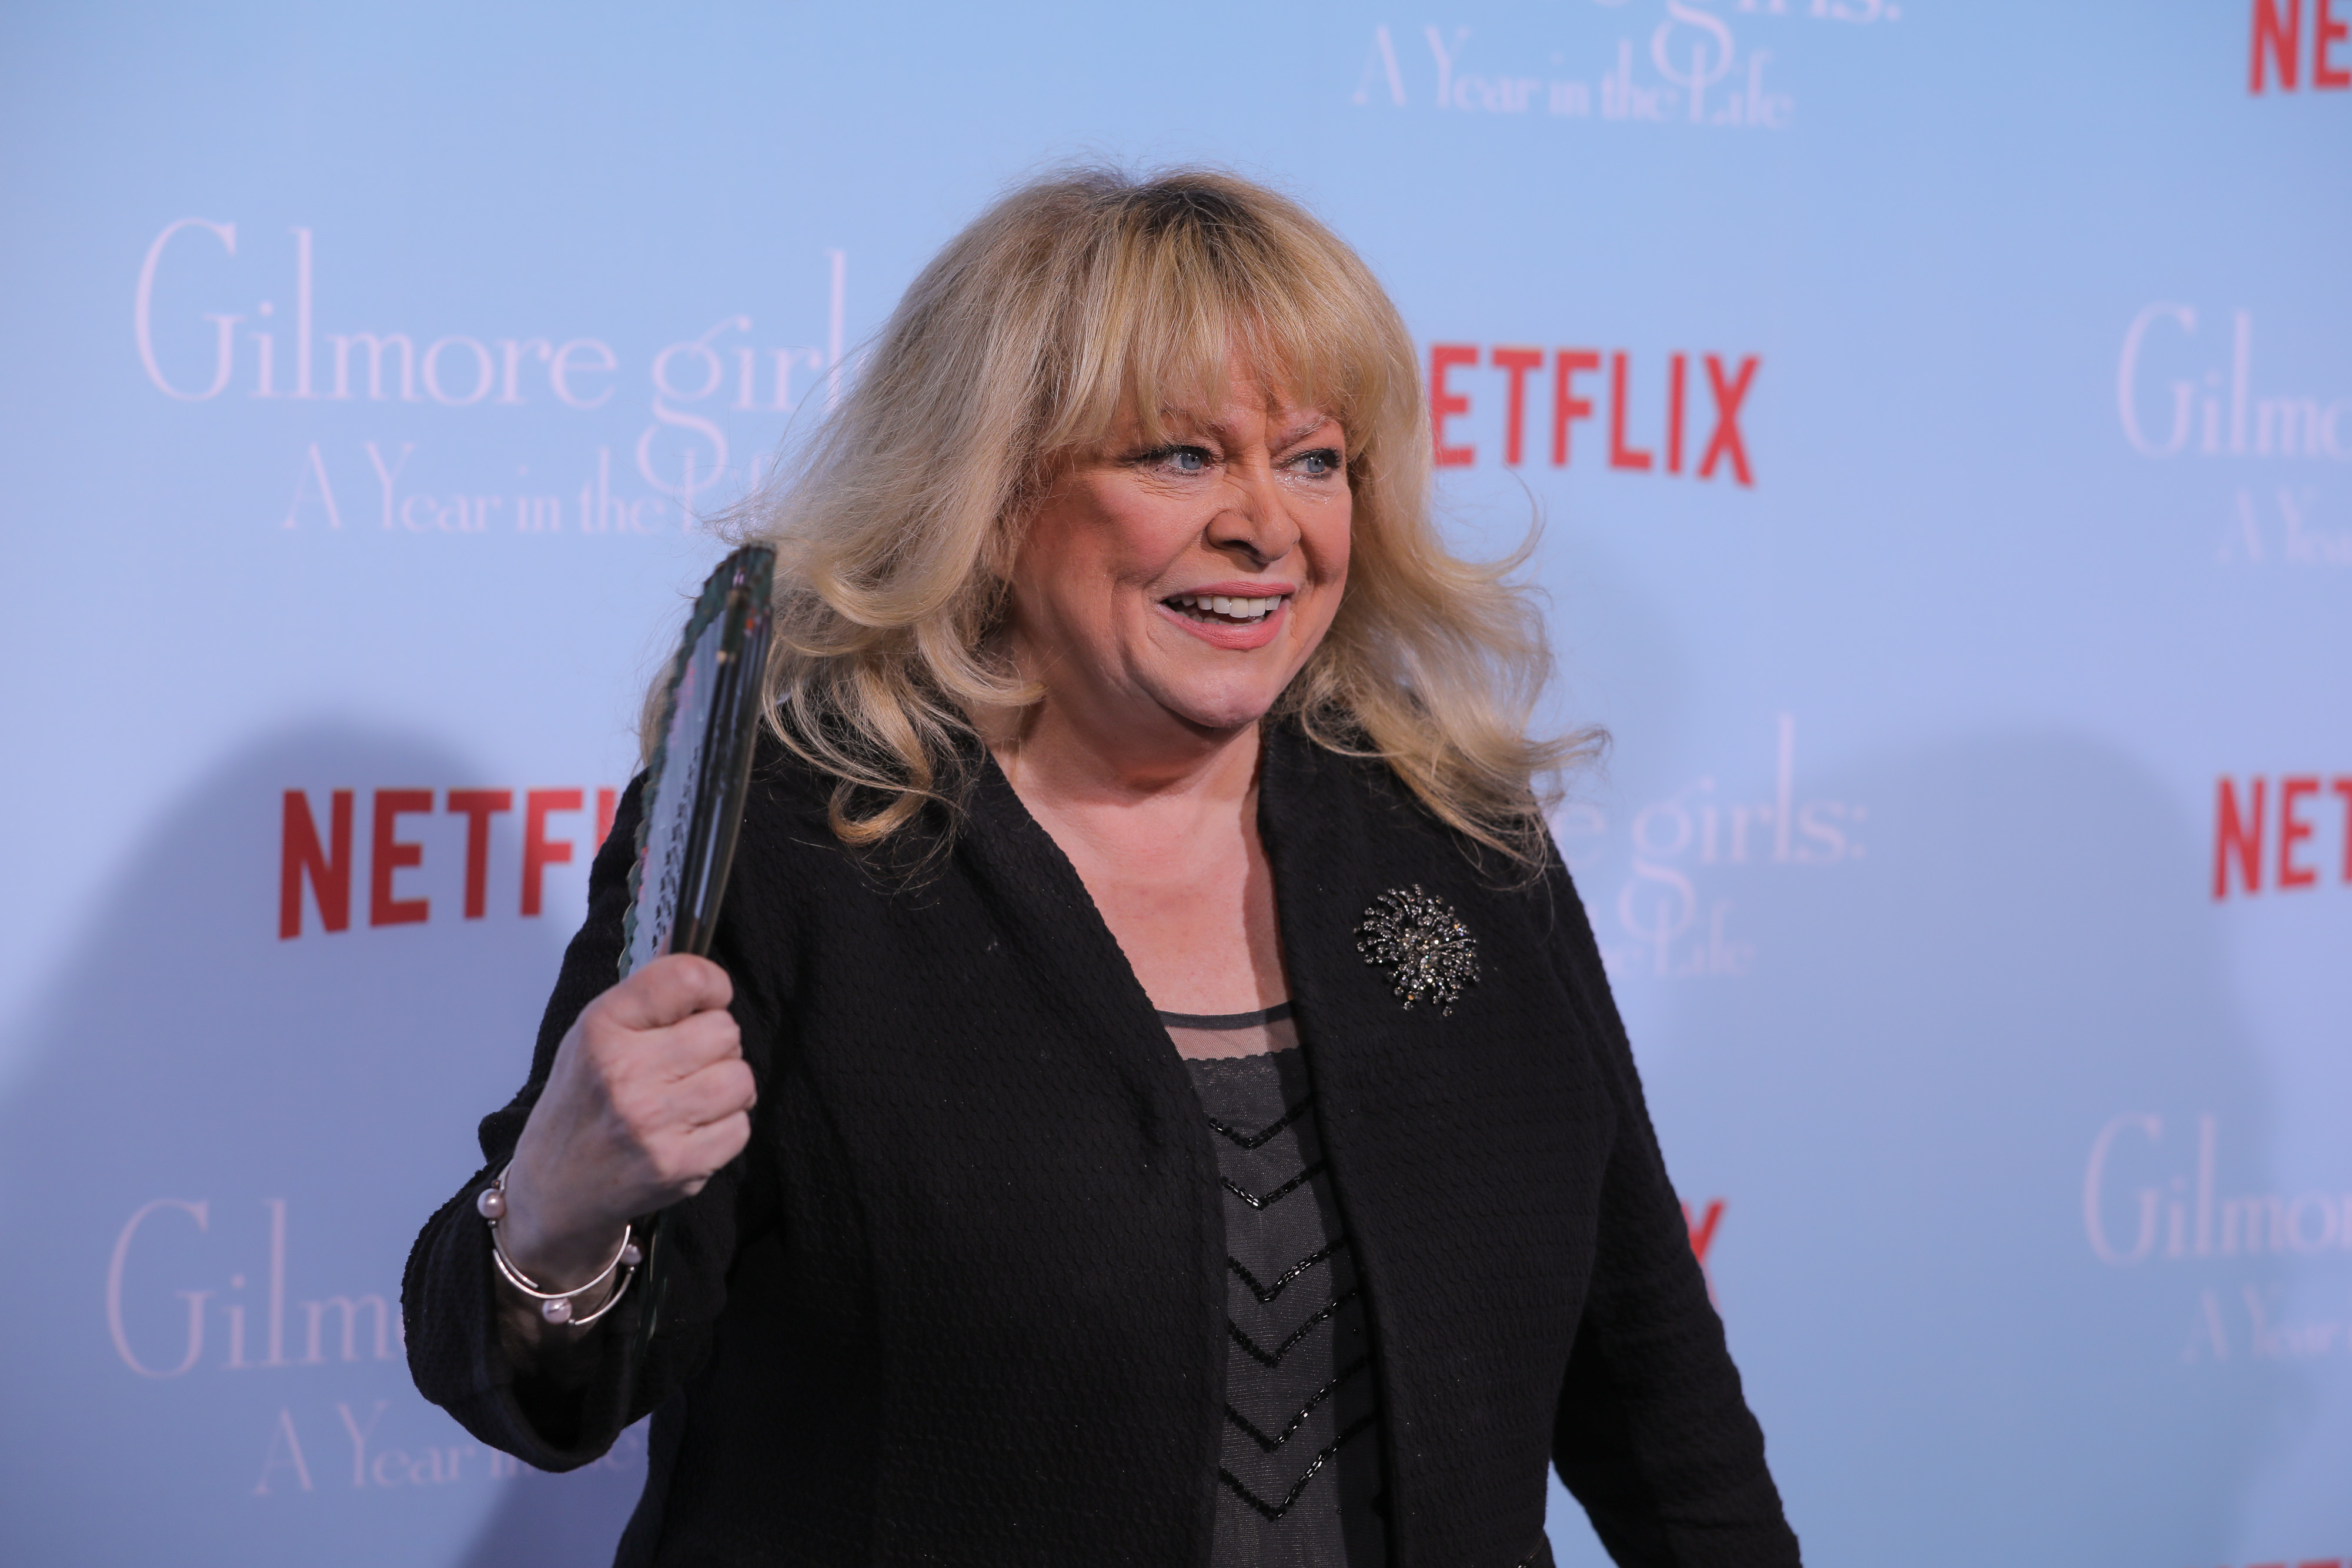 Sally Struthers at the "Gilmore Girls: A Year in the Life" TV series premiere on November 18, 2016. | Source: Getty Images